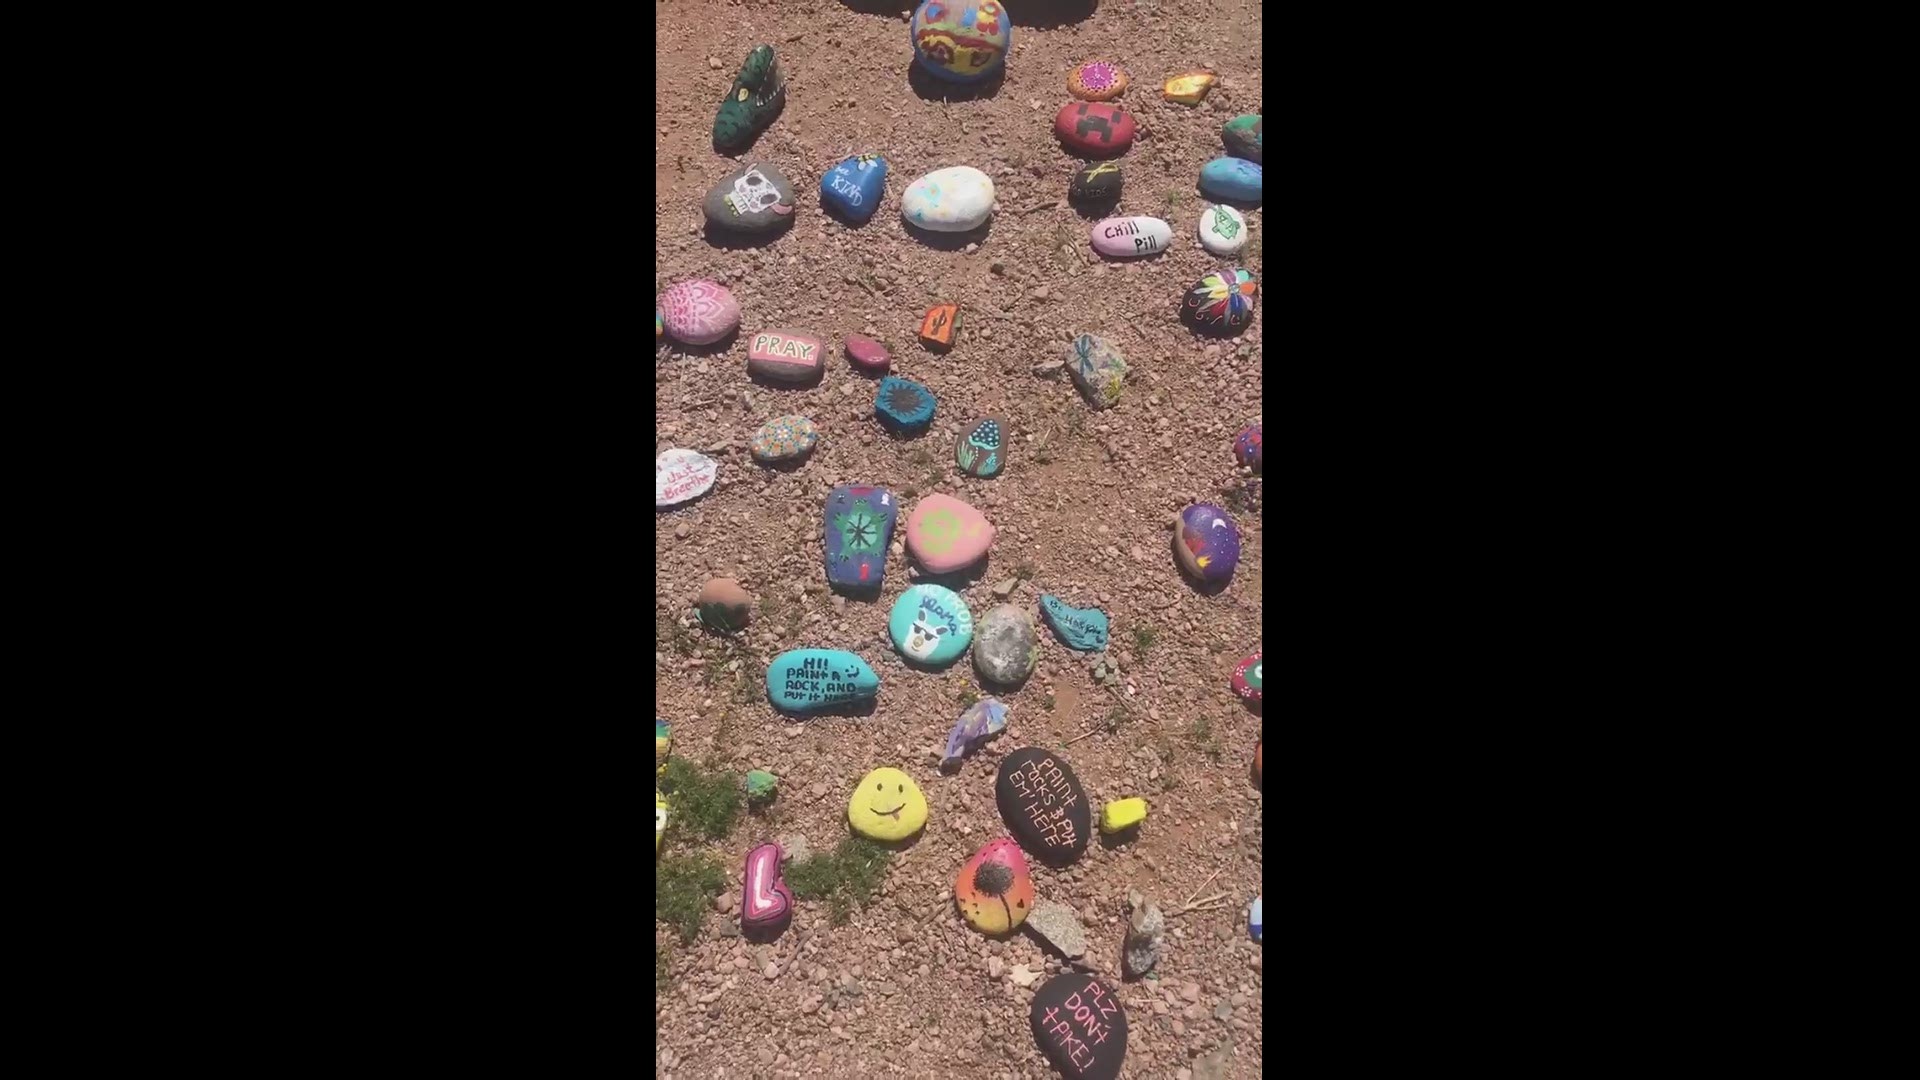 Jeffery Barnes captured some video of rocks he found while out on a hike